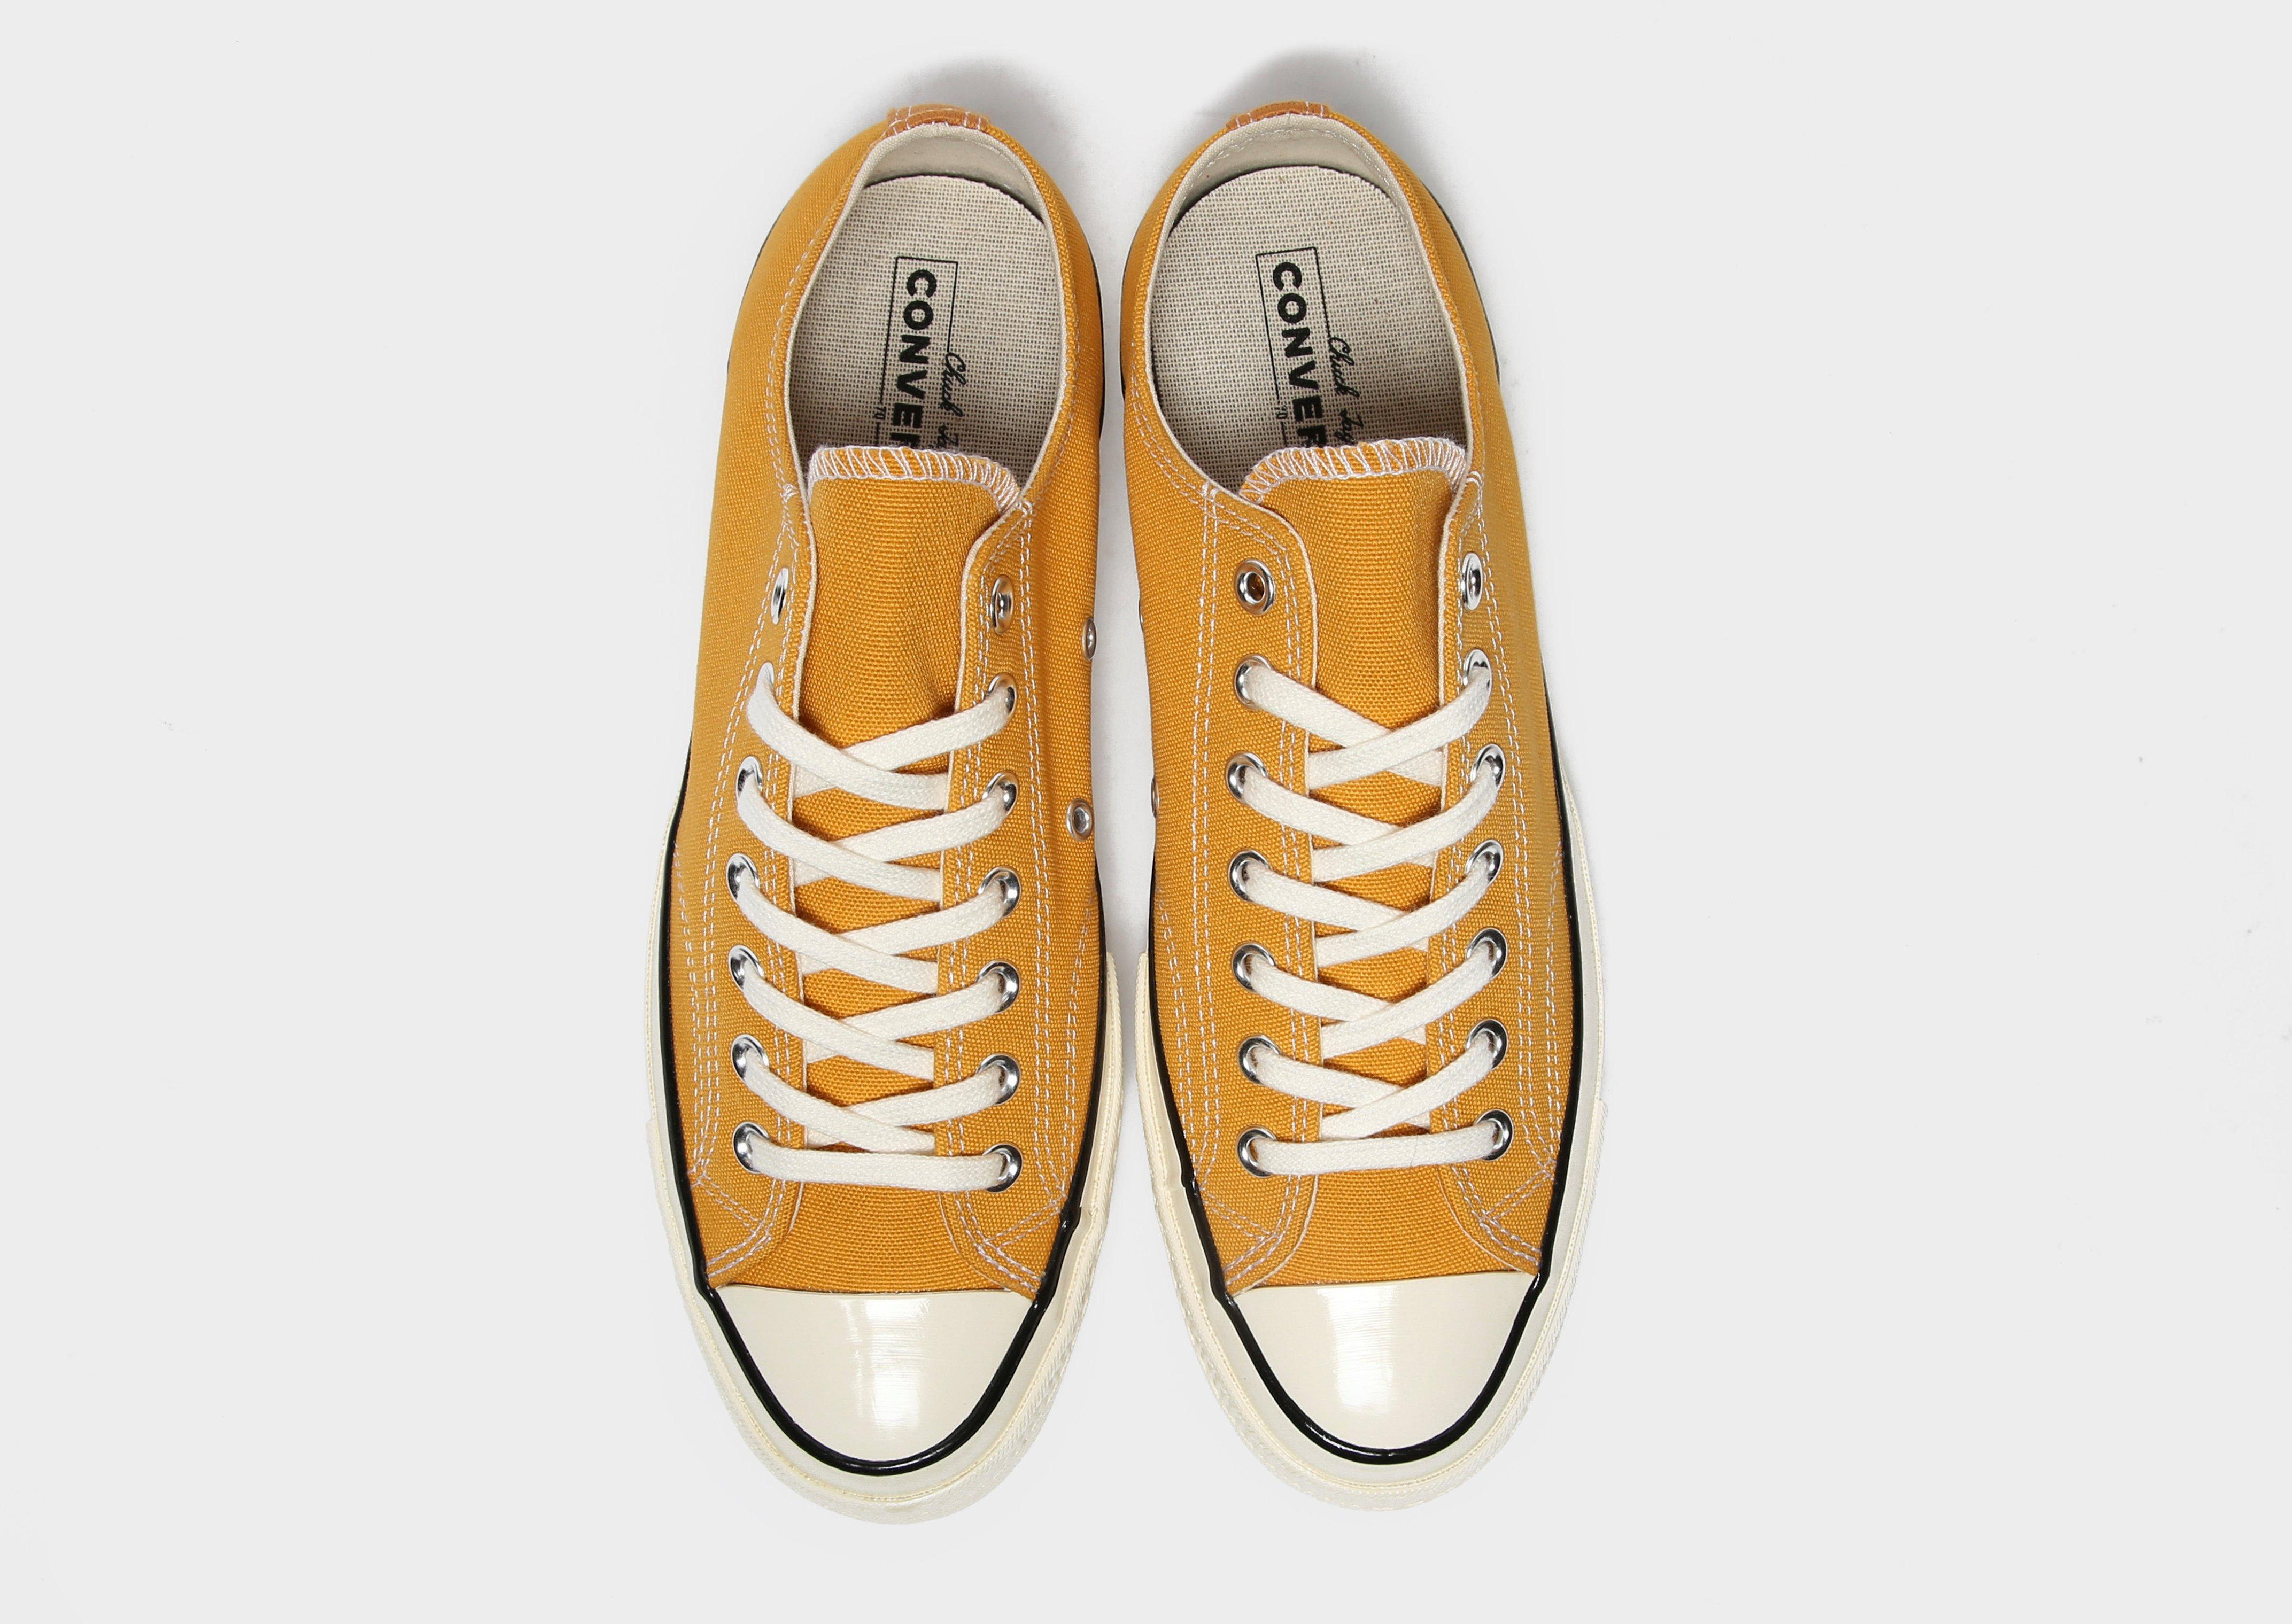 converse all star 70's ox low